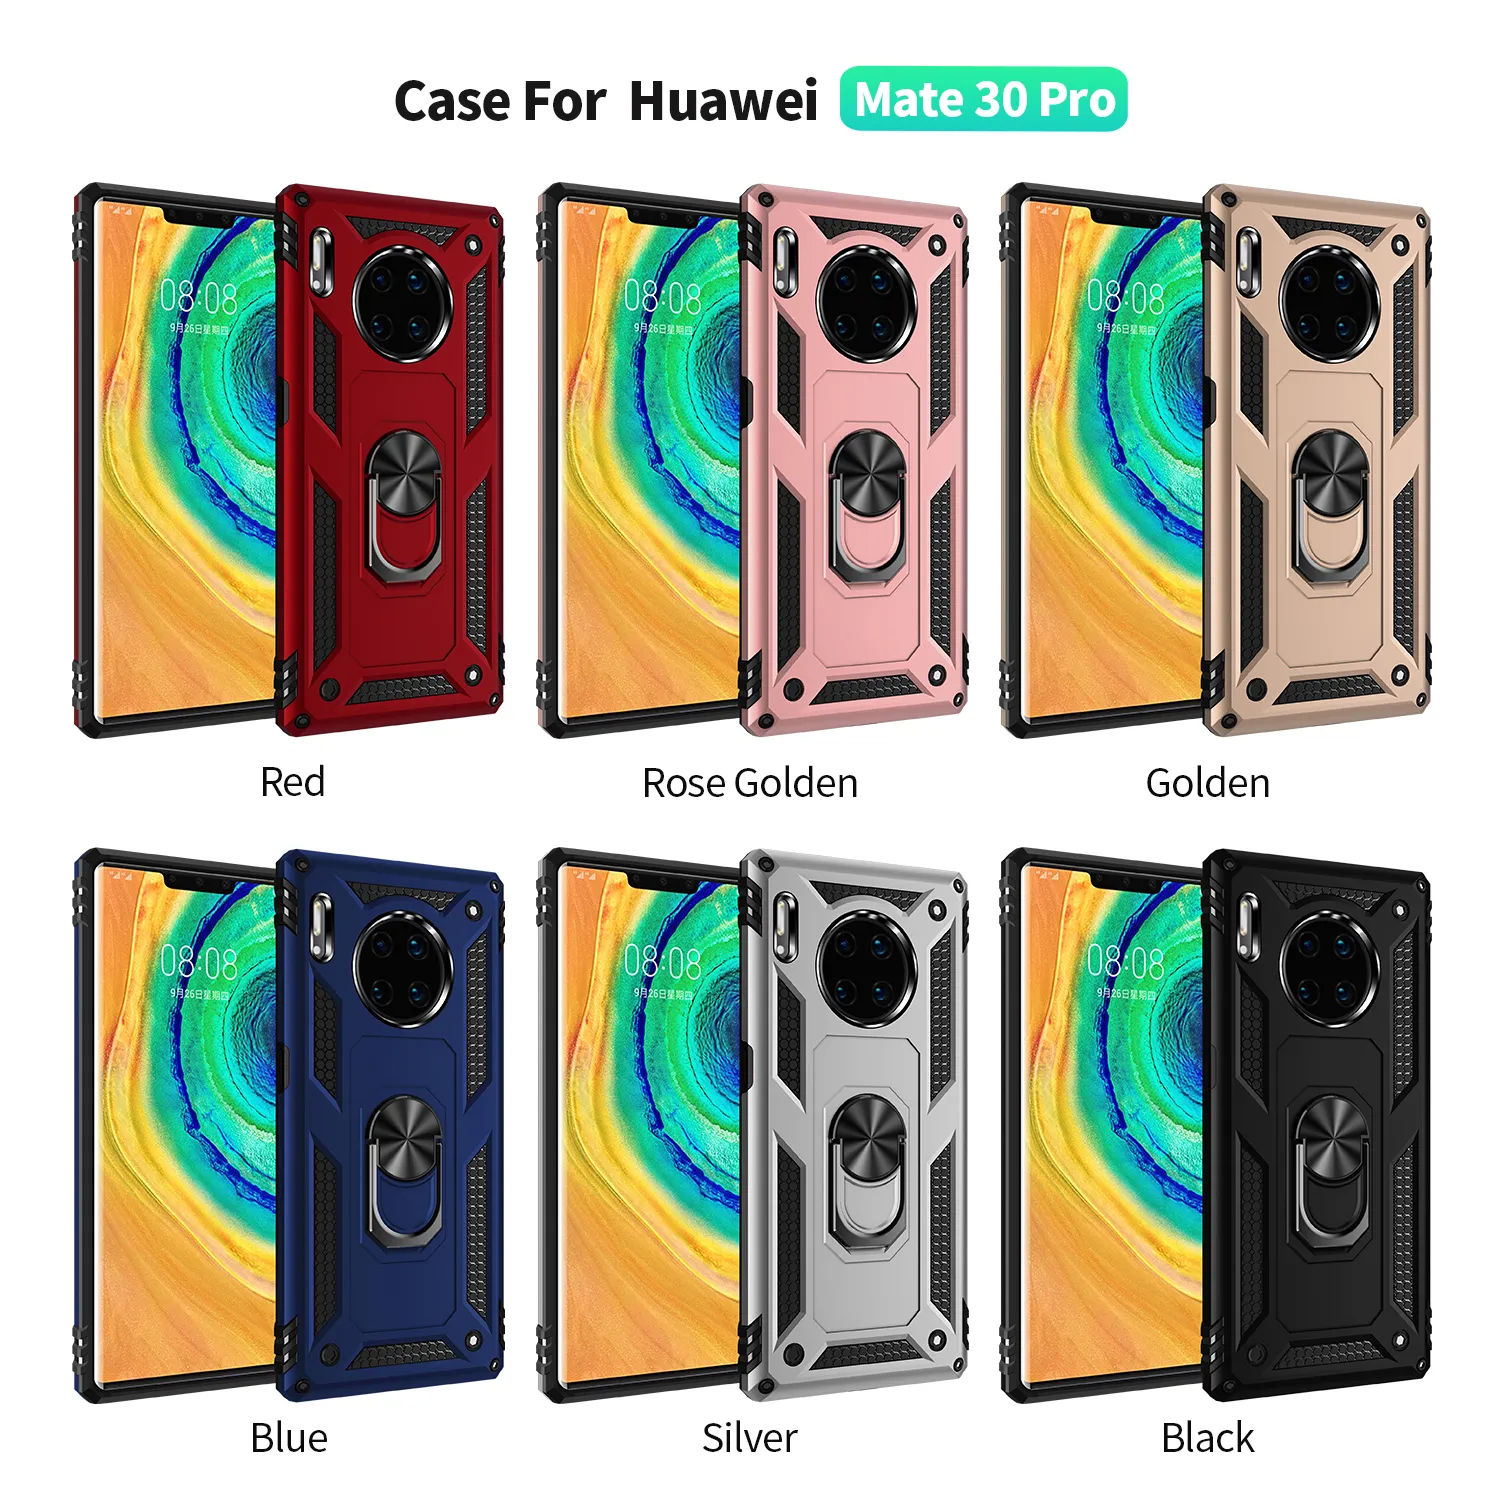 Military Blade Metal Kickstand Case For Huawei Mate 30 Pro Mate 30 P30 Pro P20 Lite Mate20 Lite Drop Tested Protective Cover